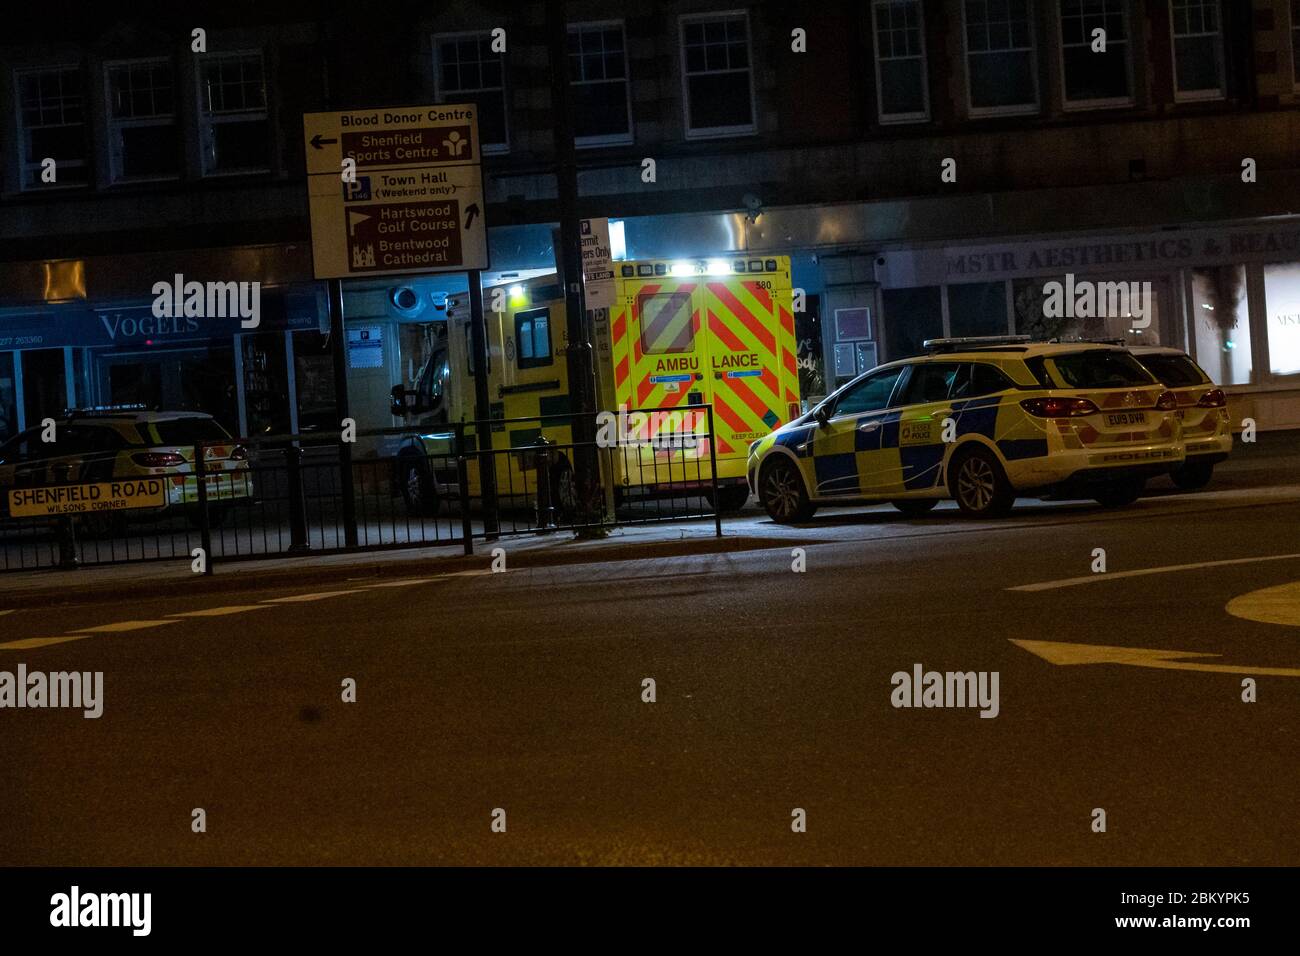 Brentwood Essex 5th May 2020 A police incident in Brentwood Essex. A man had climbed on to a rooftop in Ingrave Road, Brentwood, police spoke to the man who agreed to come down where he was detained before being left in the care of medical professionals. Credit: Ian Davidson/Alamy Live News Stock Photo